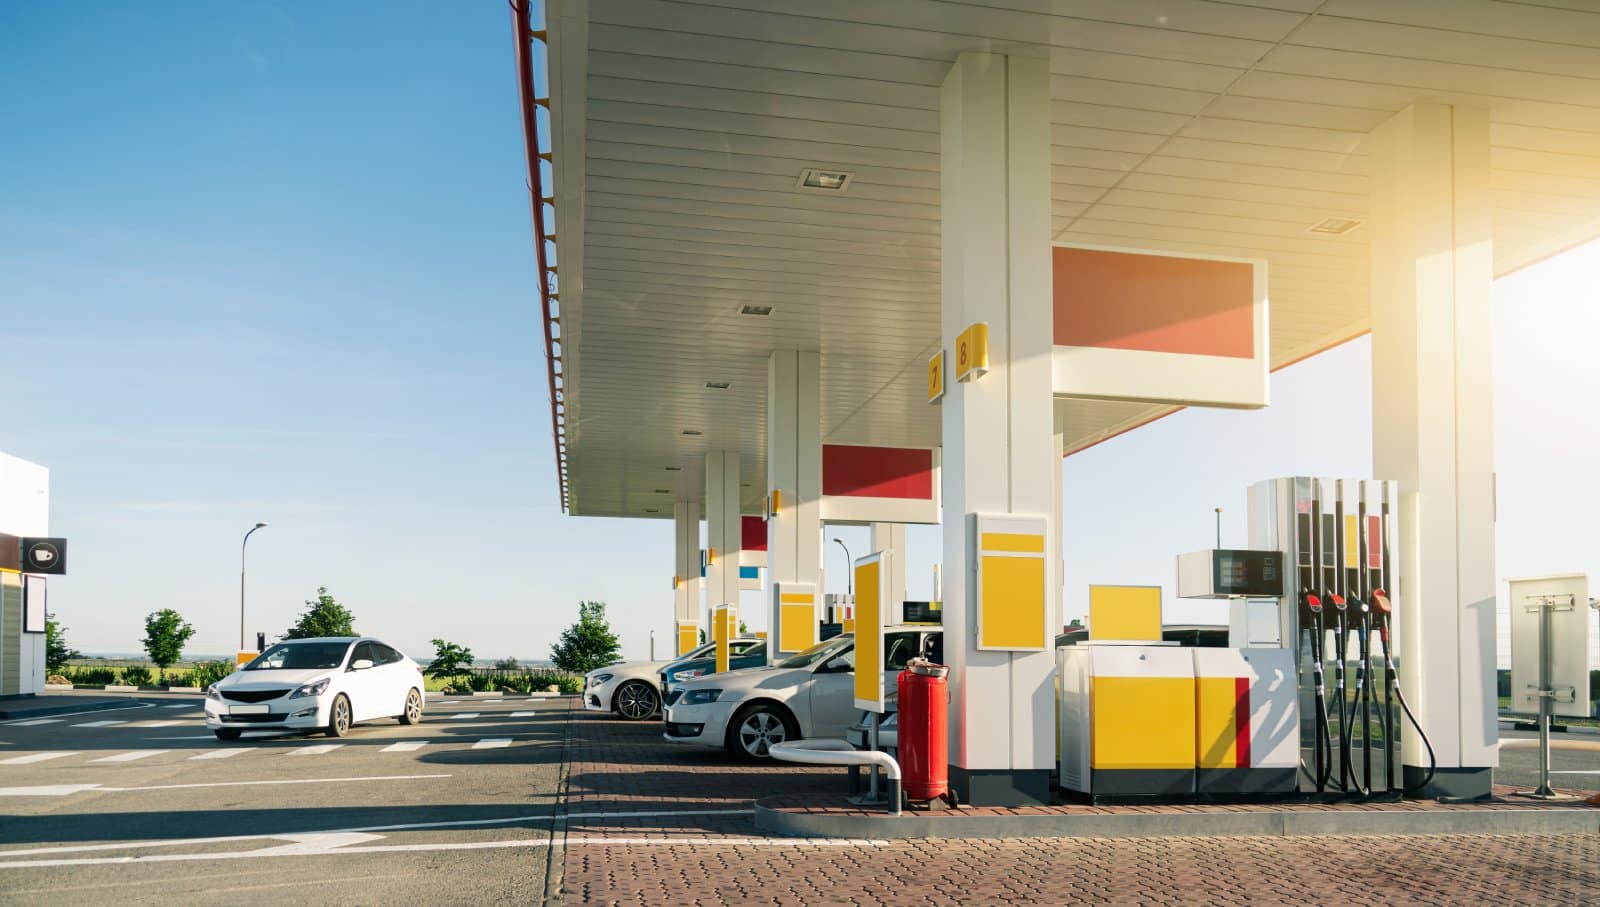 Image credit: Shutterstock / Scharfsinn <p>Driving across the states? GasBuddy helps you find the cheapest gas near you. On a long road trip, users save an average of $200 annually on fuel.</p>